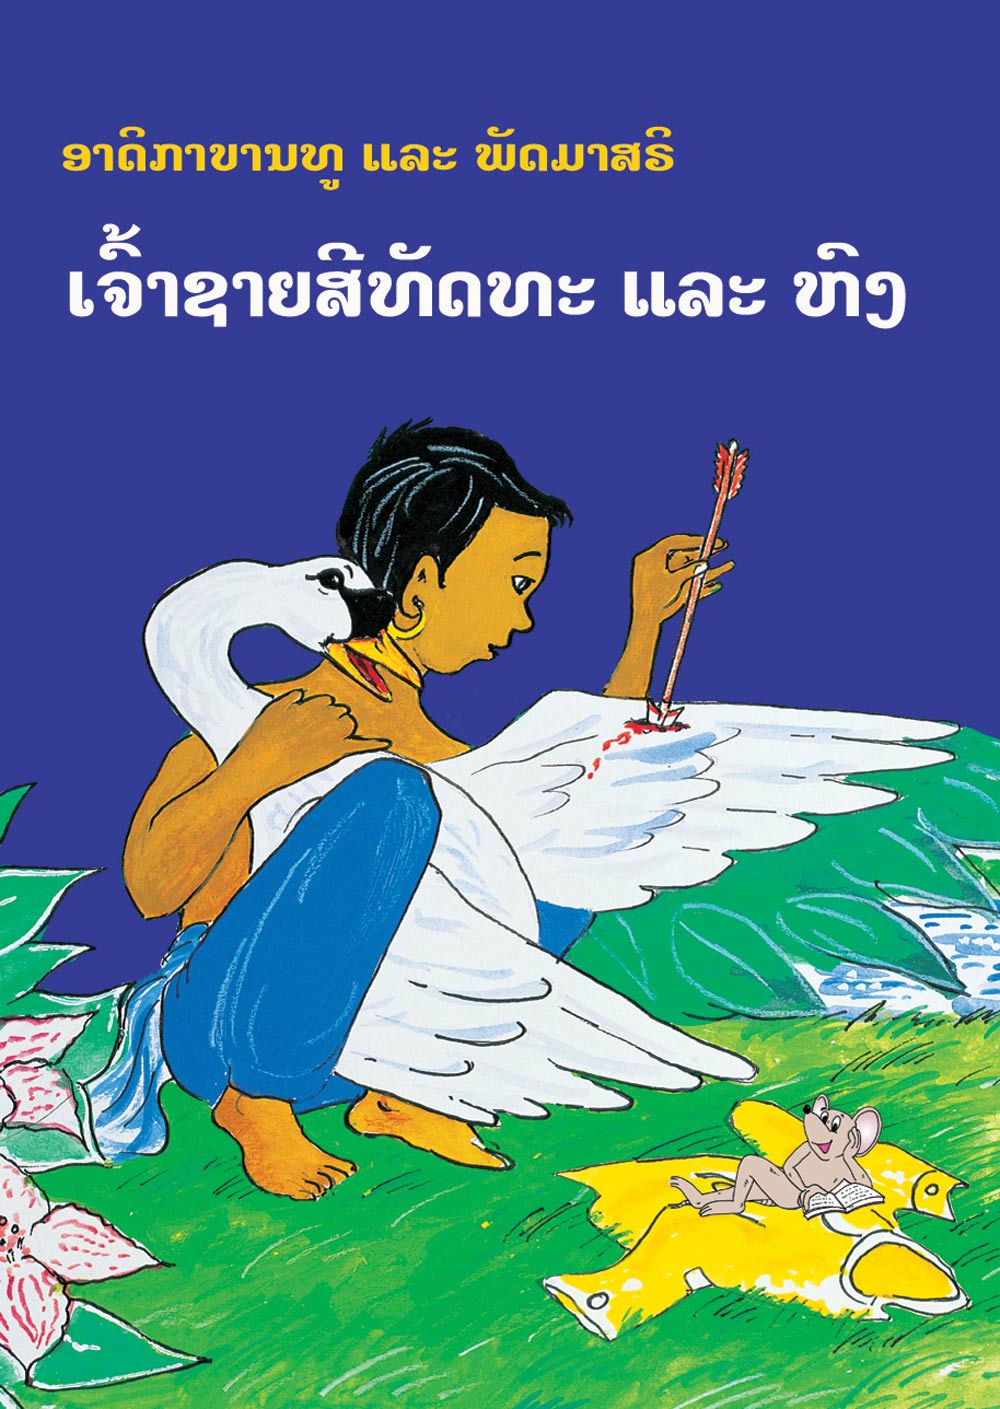 Siddhartha and the Swan large book cover, published in Lao language